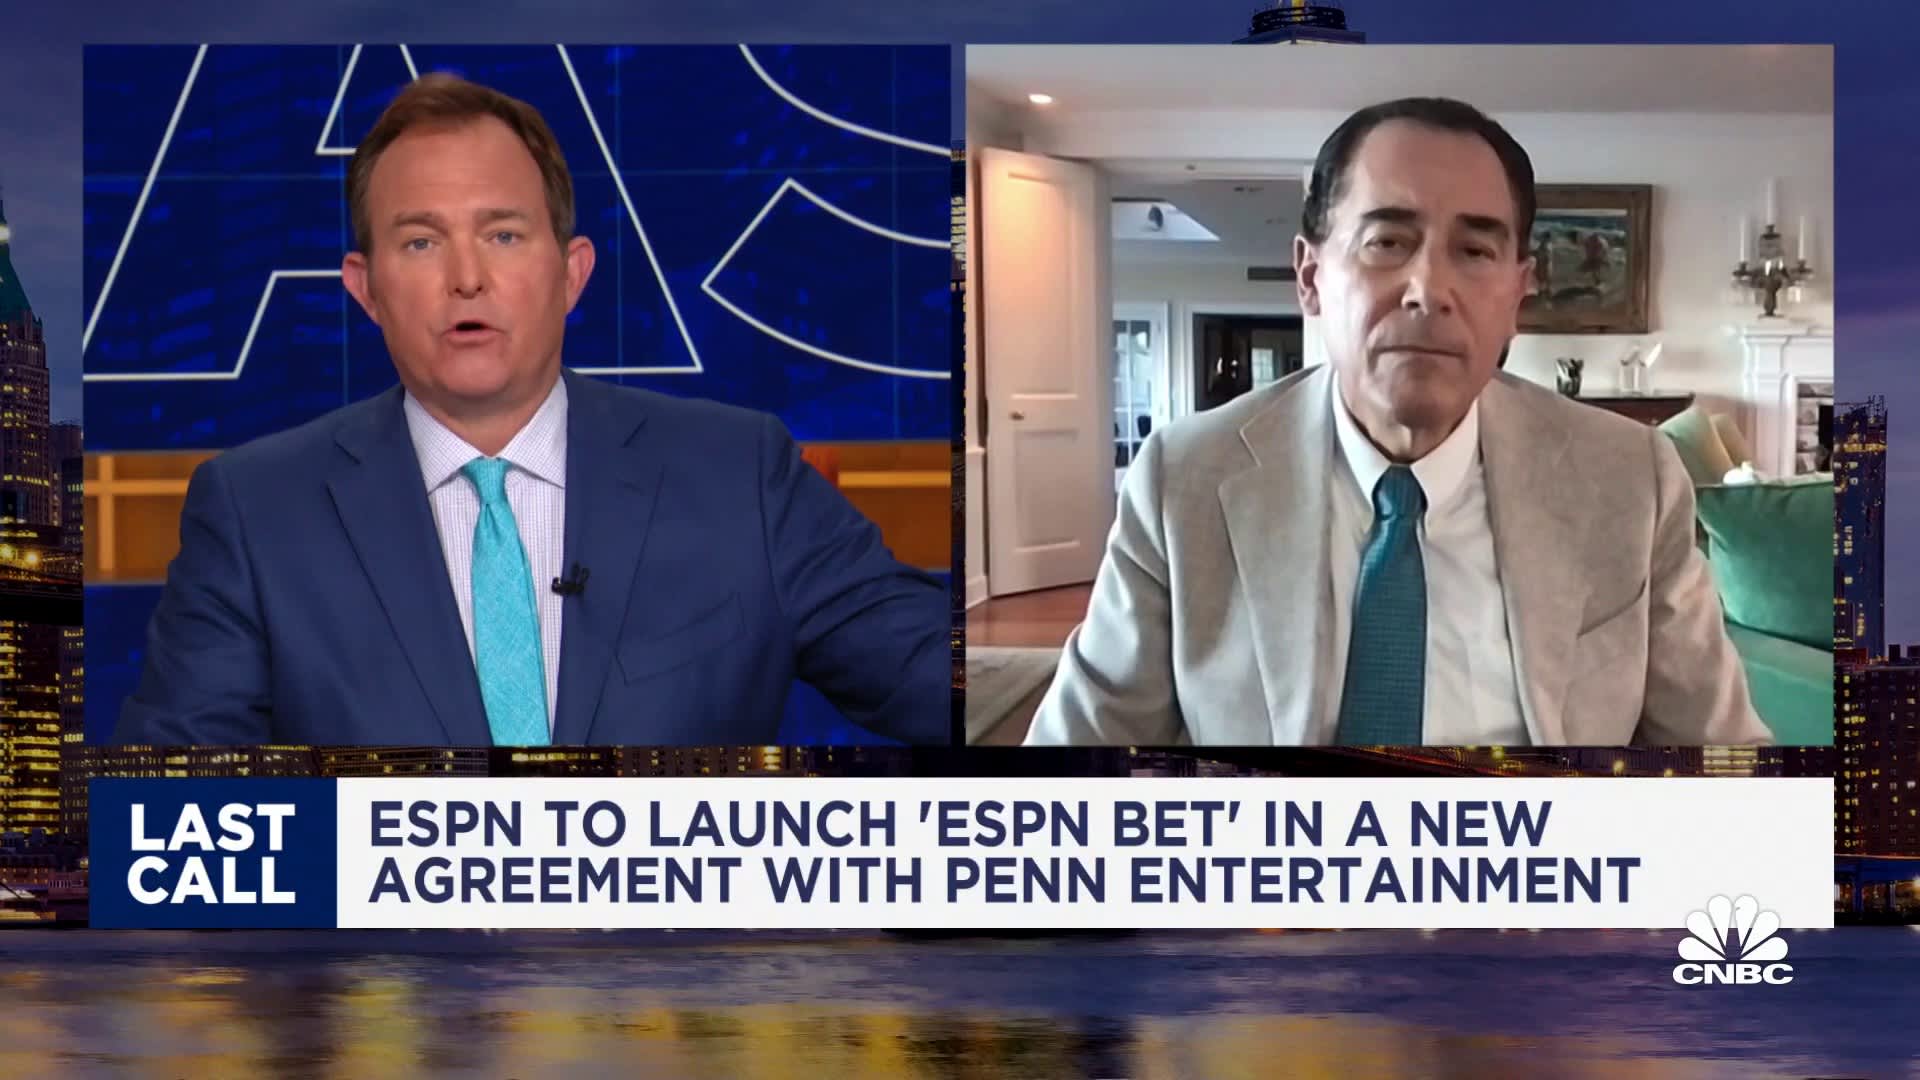 ESPN BET is a smaller move into sports betting than expected for ESPN media mogul Tom Rogers